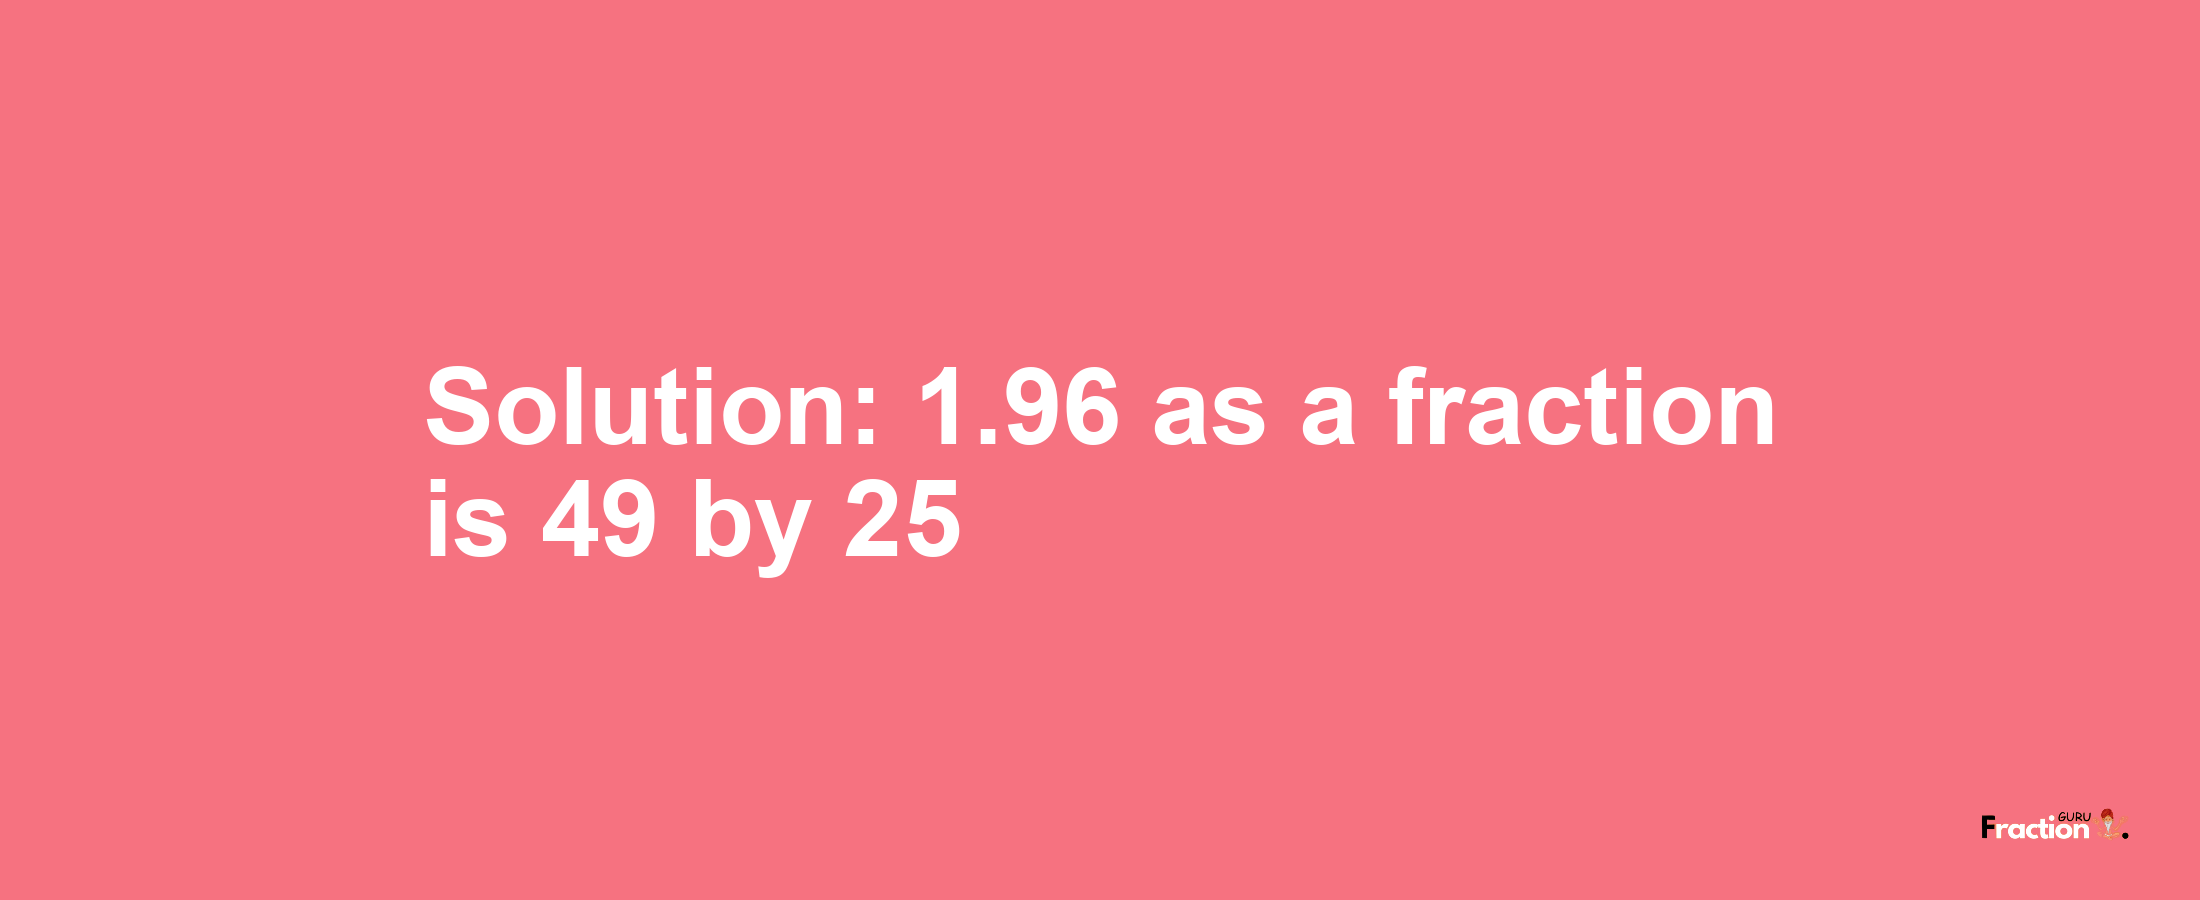 Solution:1.96 as a fraction is 49/25